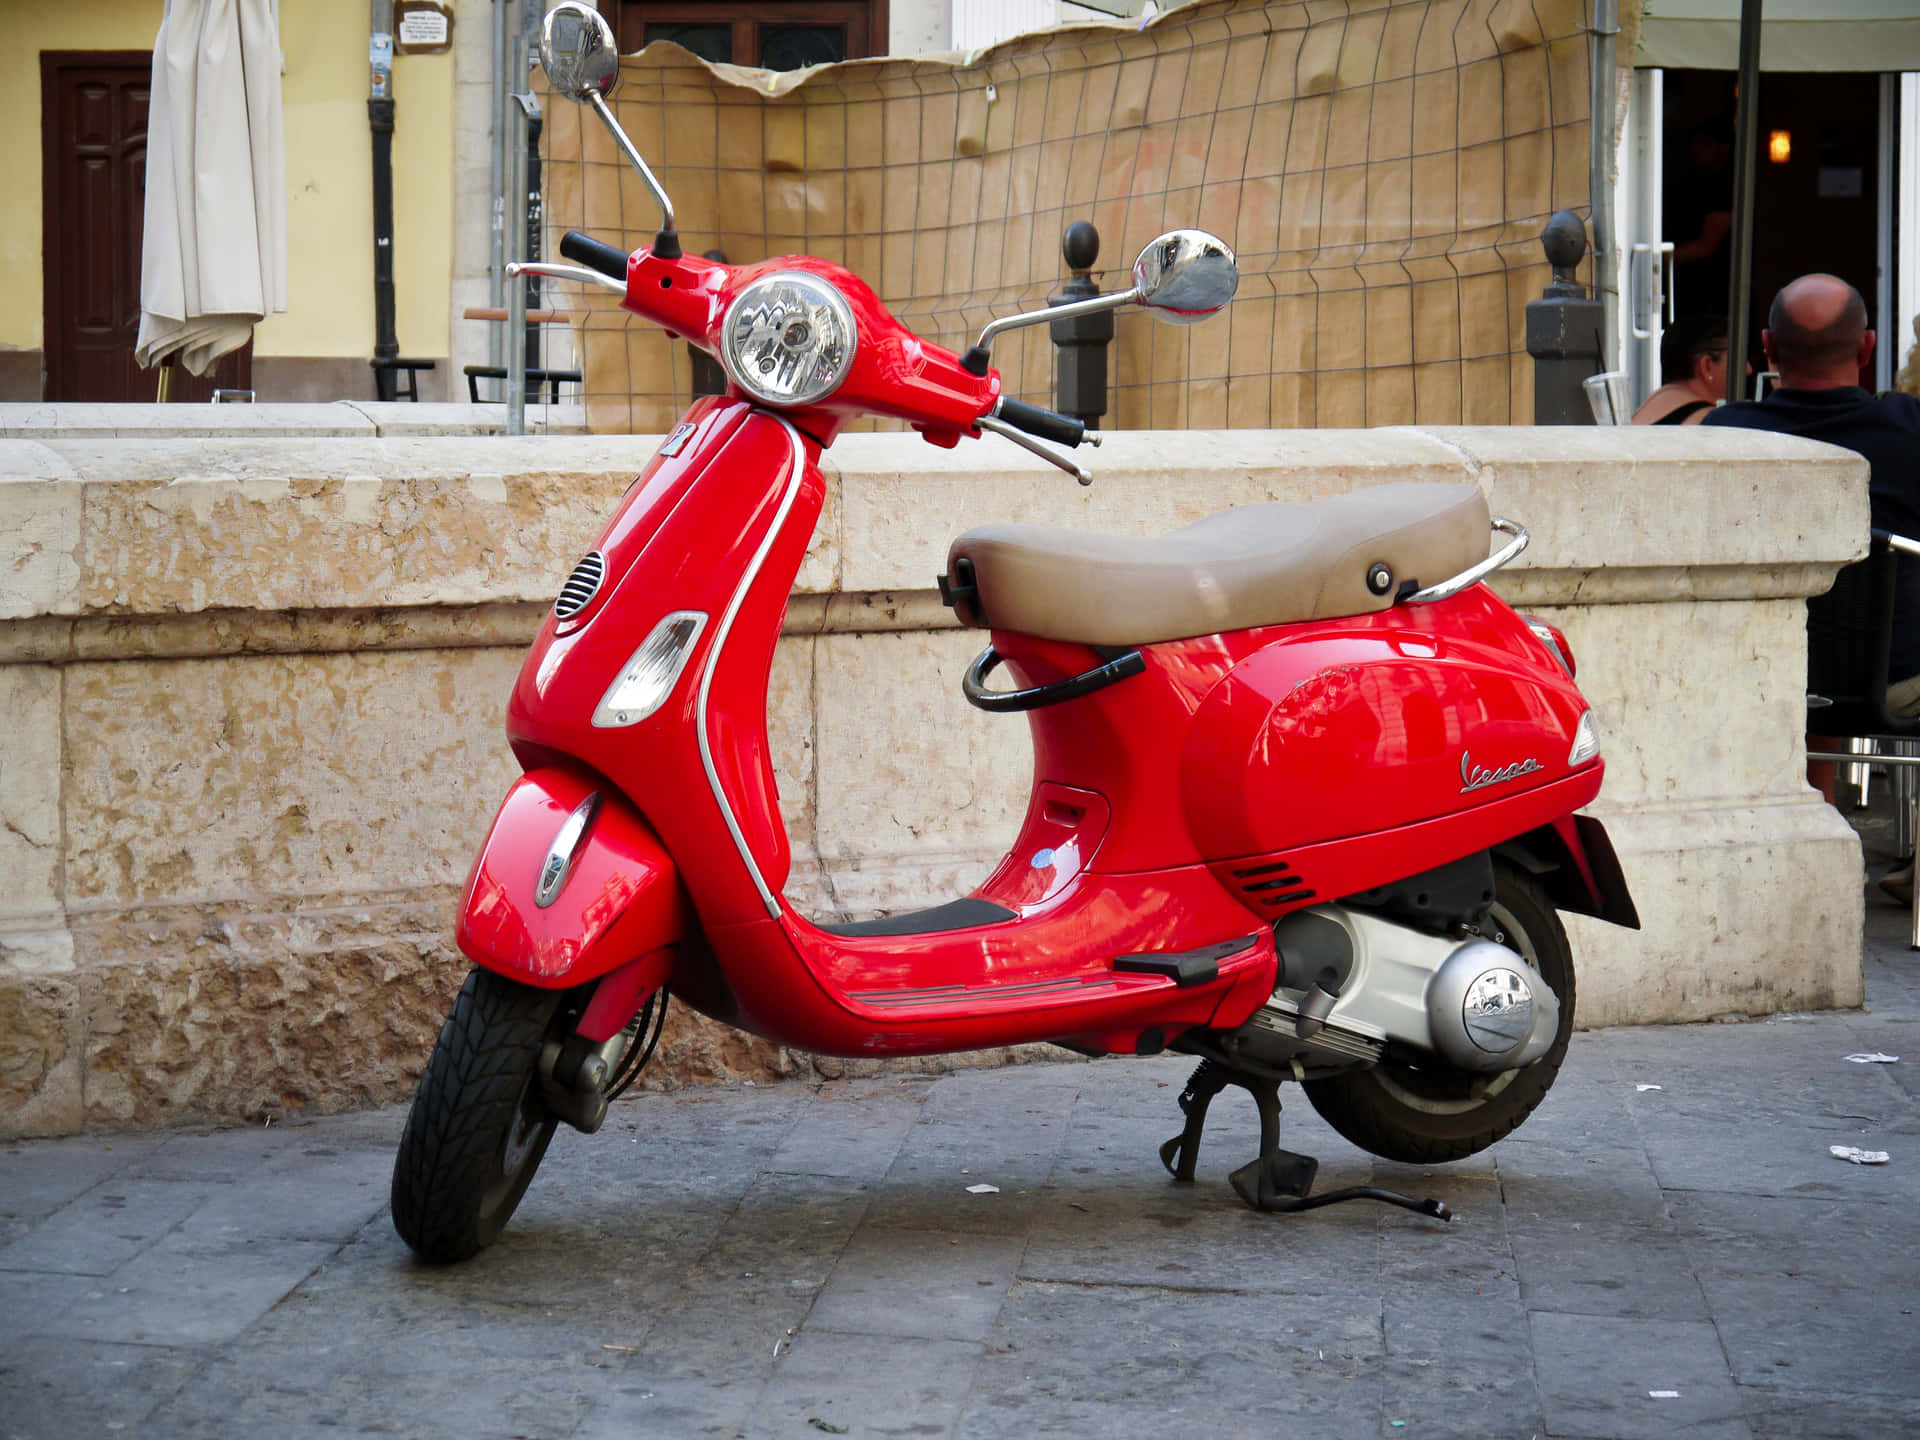 Scooter Red Italian Vespa Picture